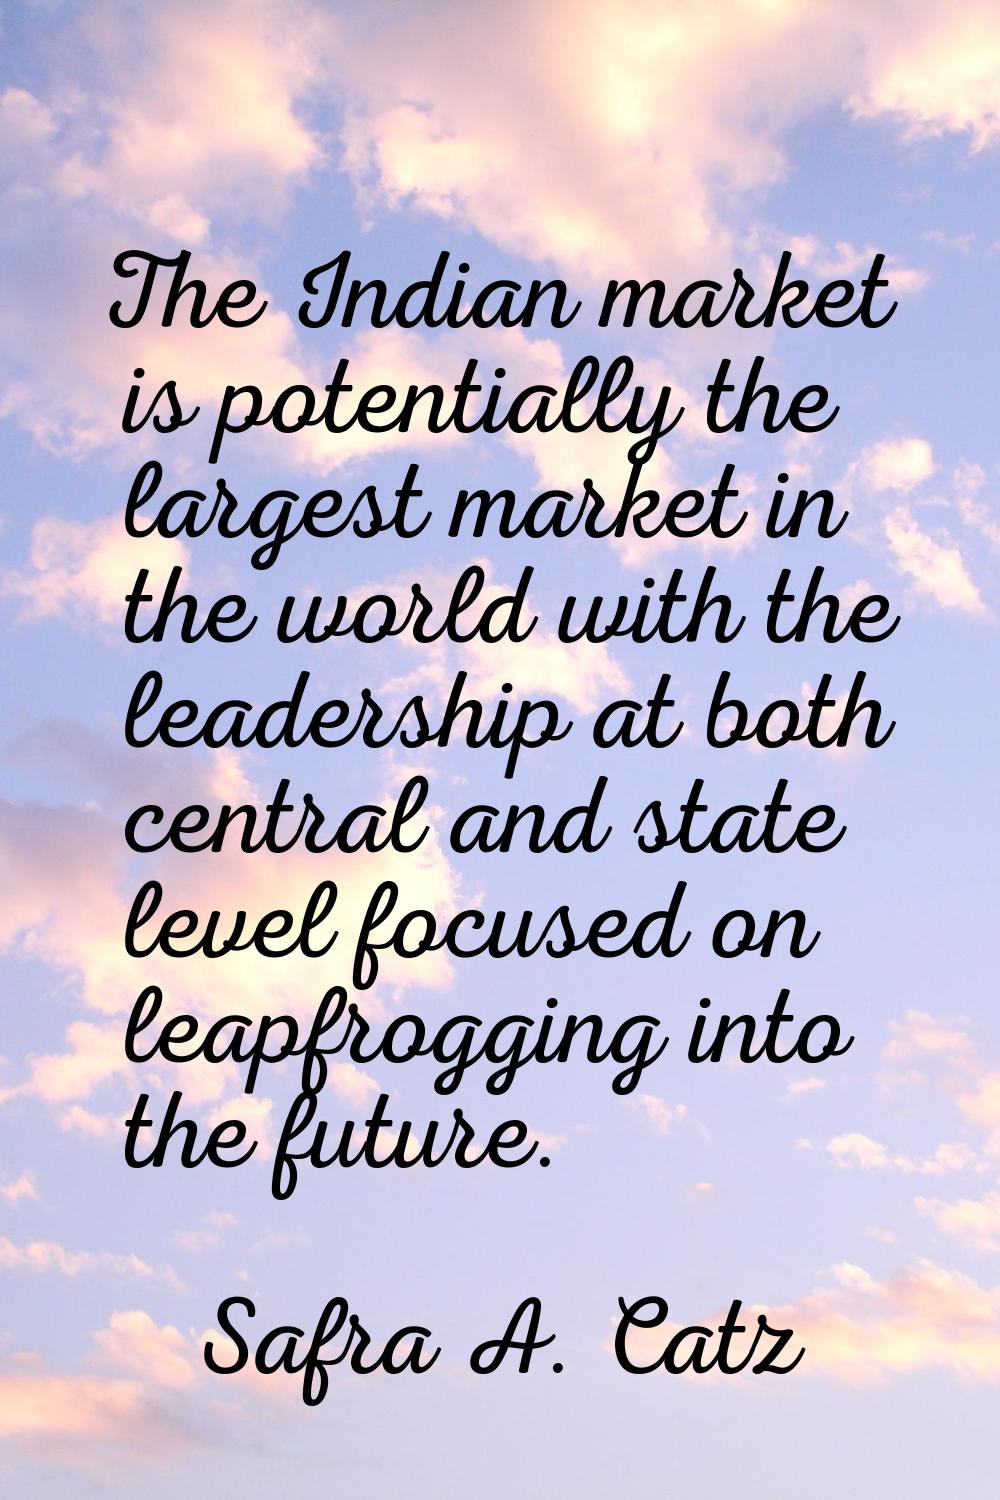 The Indian market is potentially the largest market in the world with the leadership at both centra